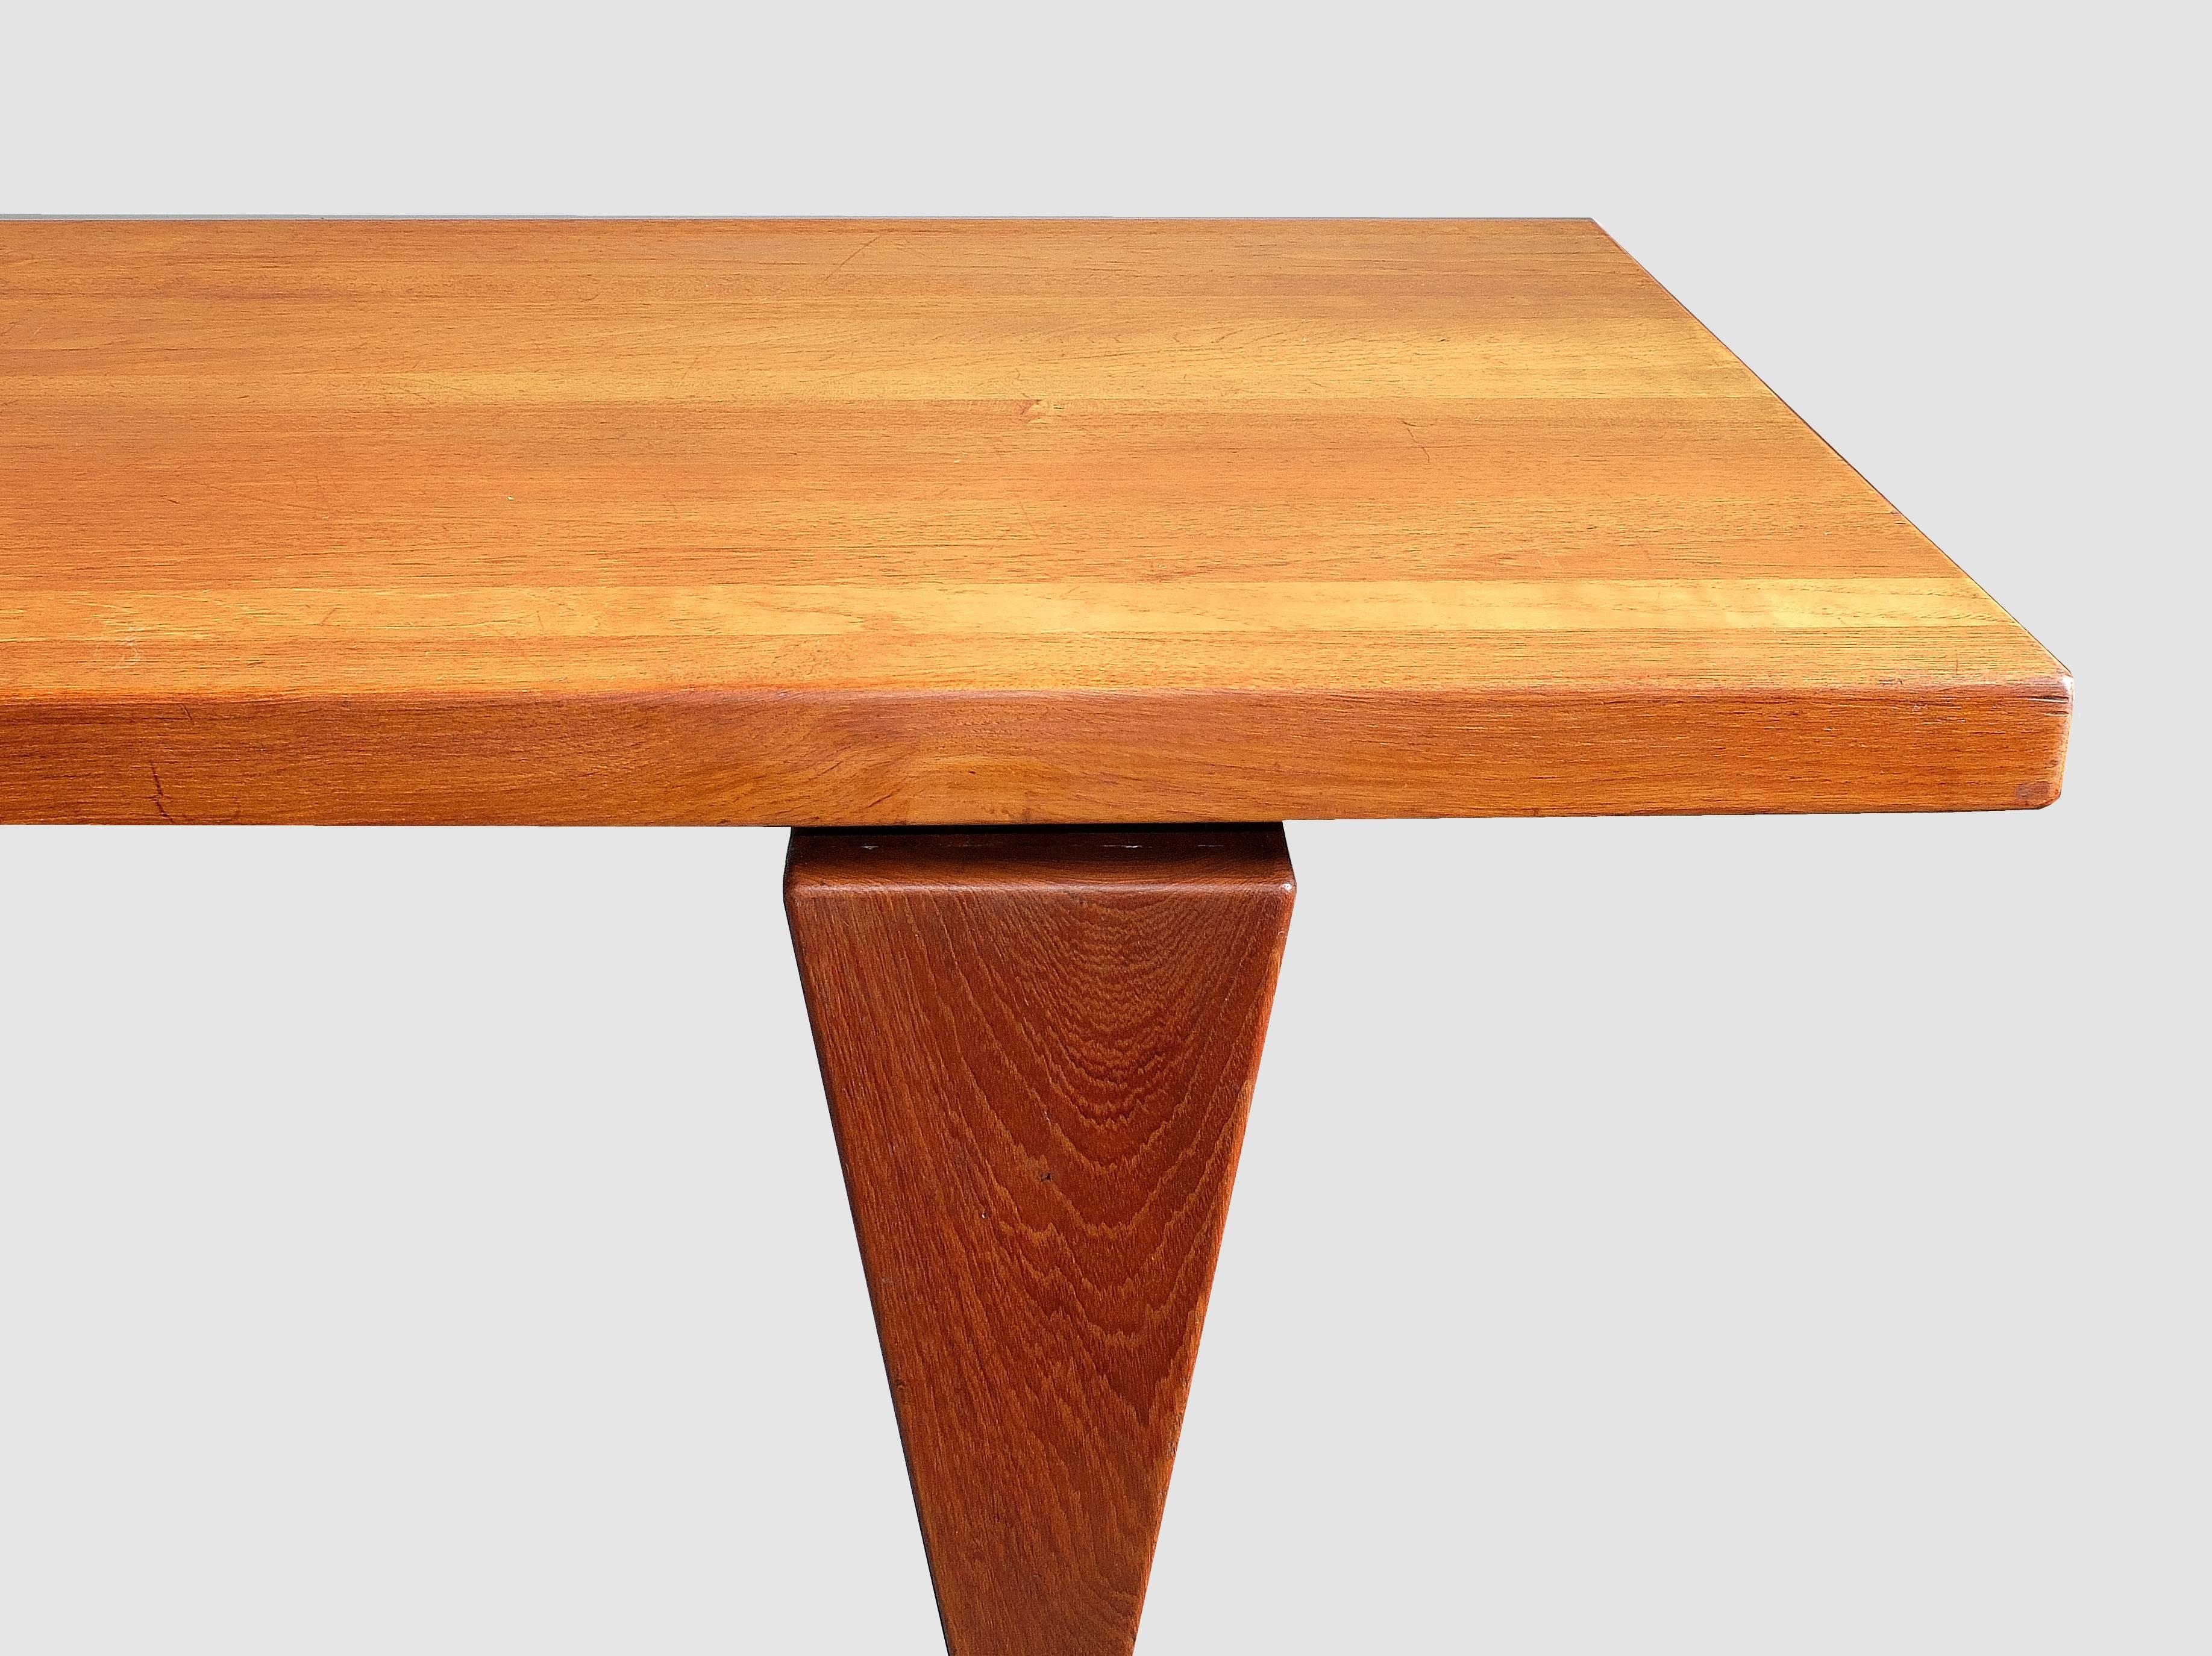 Illum Wikkelso Coffee Table Architectural Solid Teak 1960s Danish In Excellent Condition For Sale In London, GB